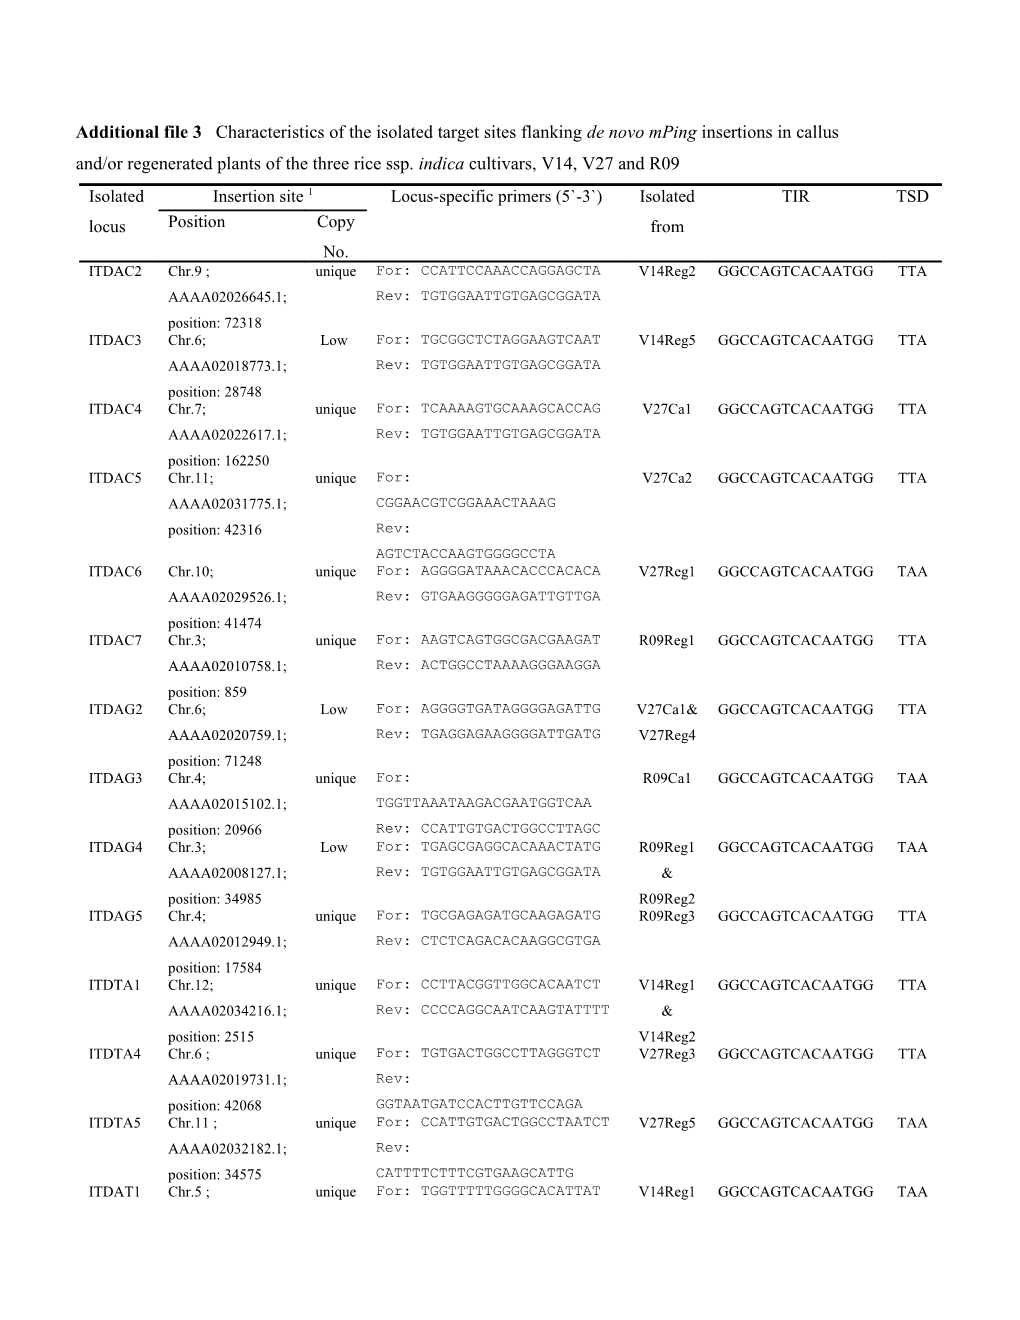 Table 5 Characteristics of Isolated Target Sites Flaking De Novo Mping Insertions in Cultured